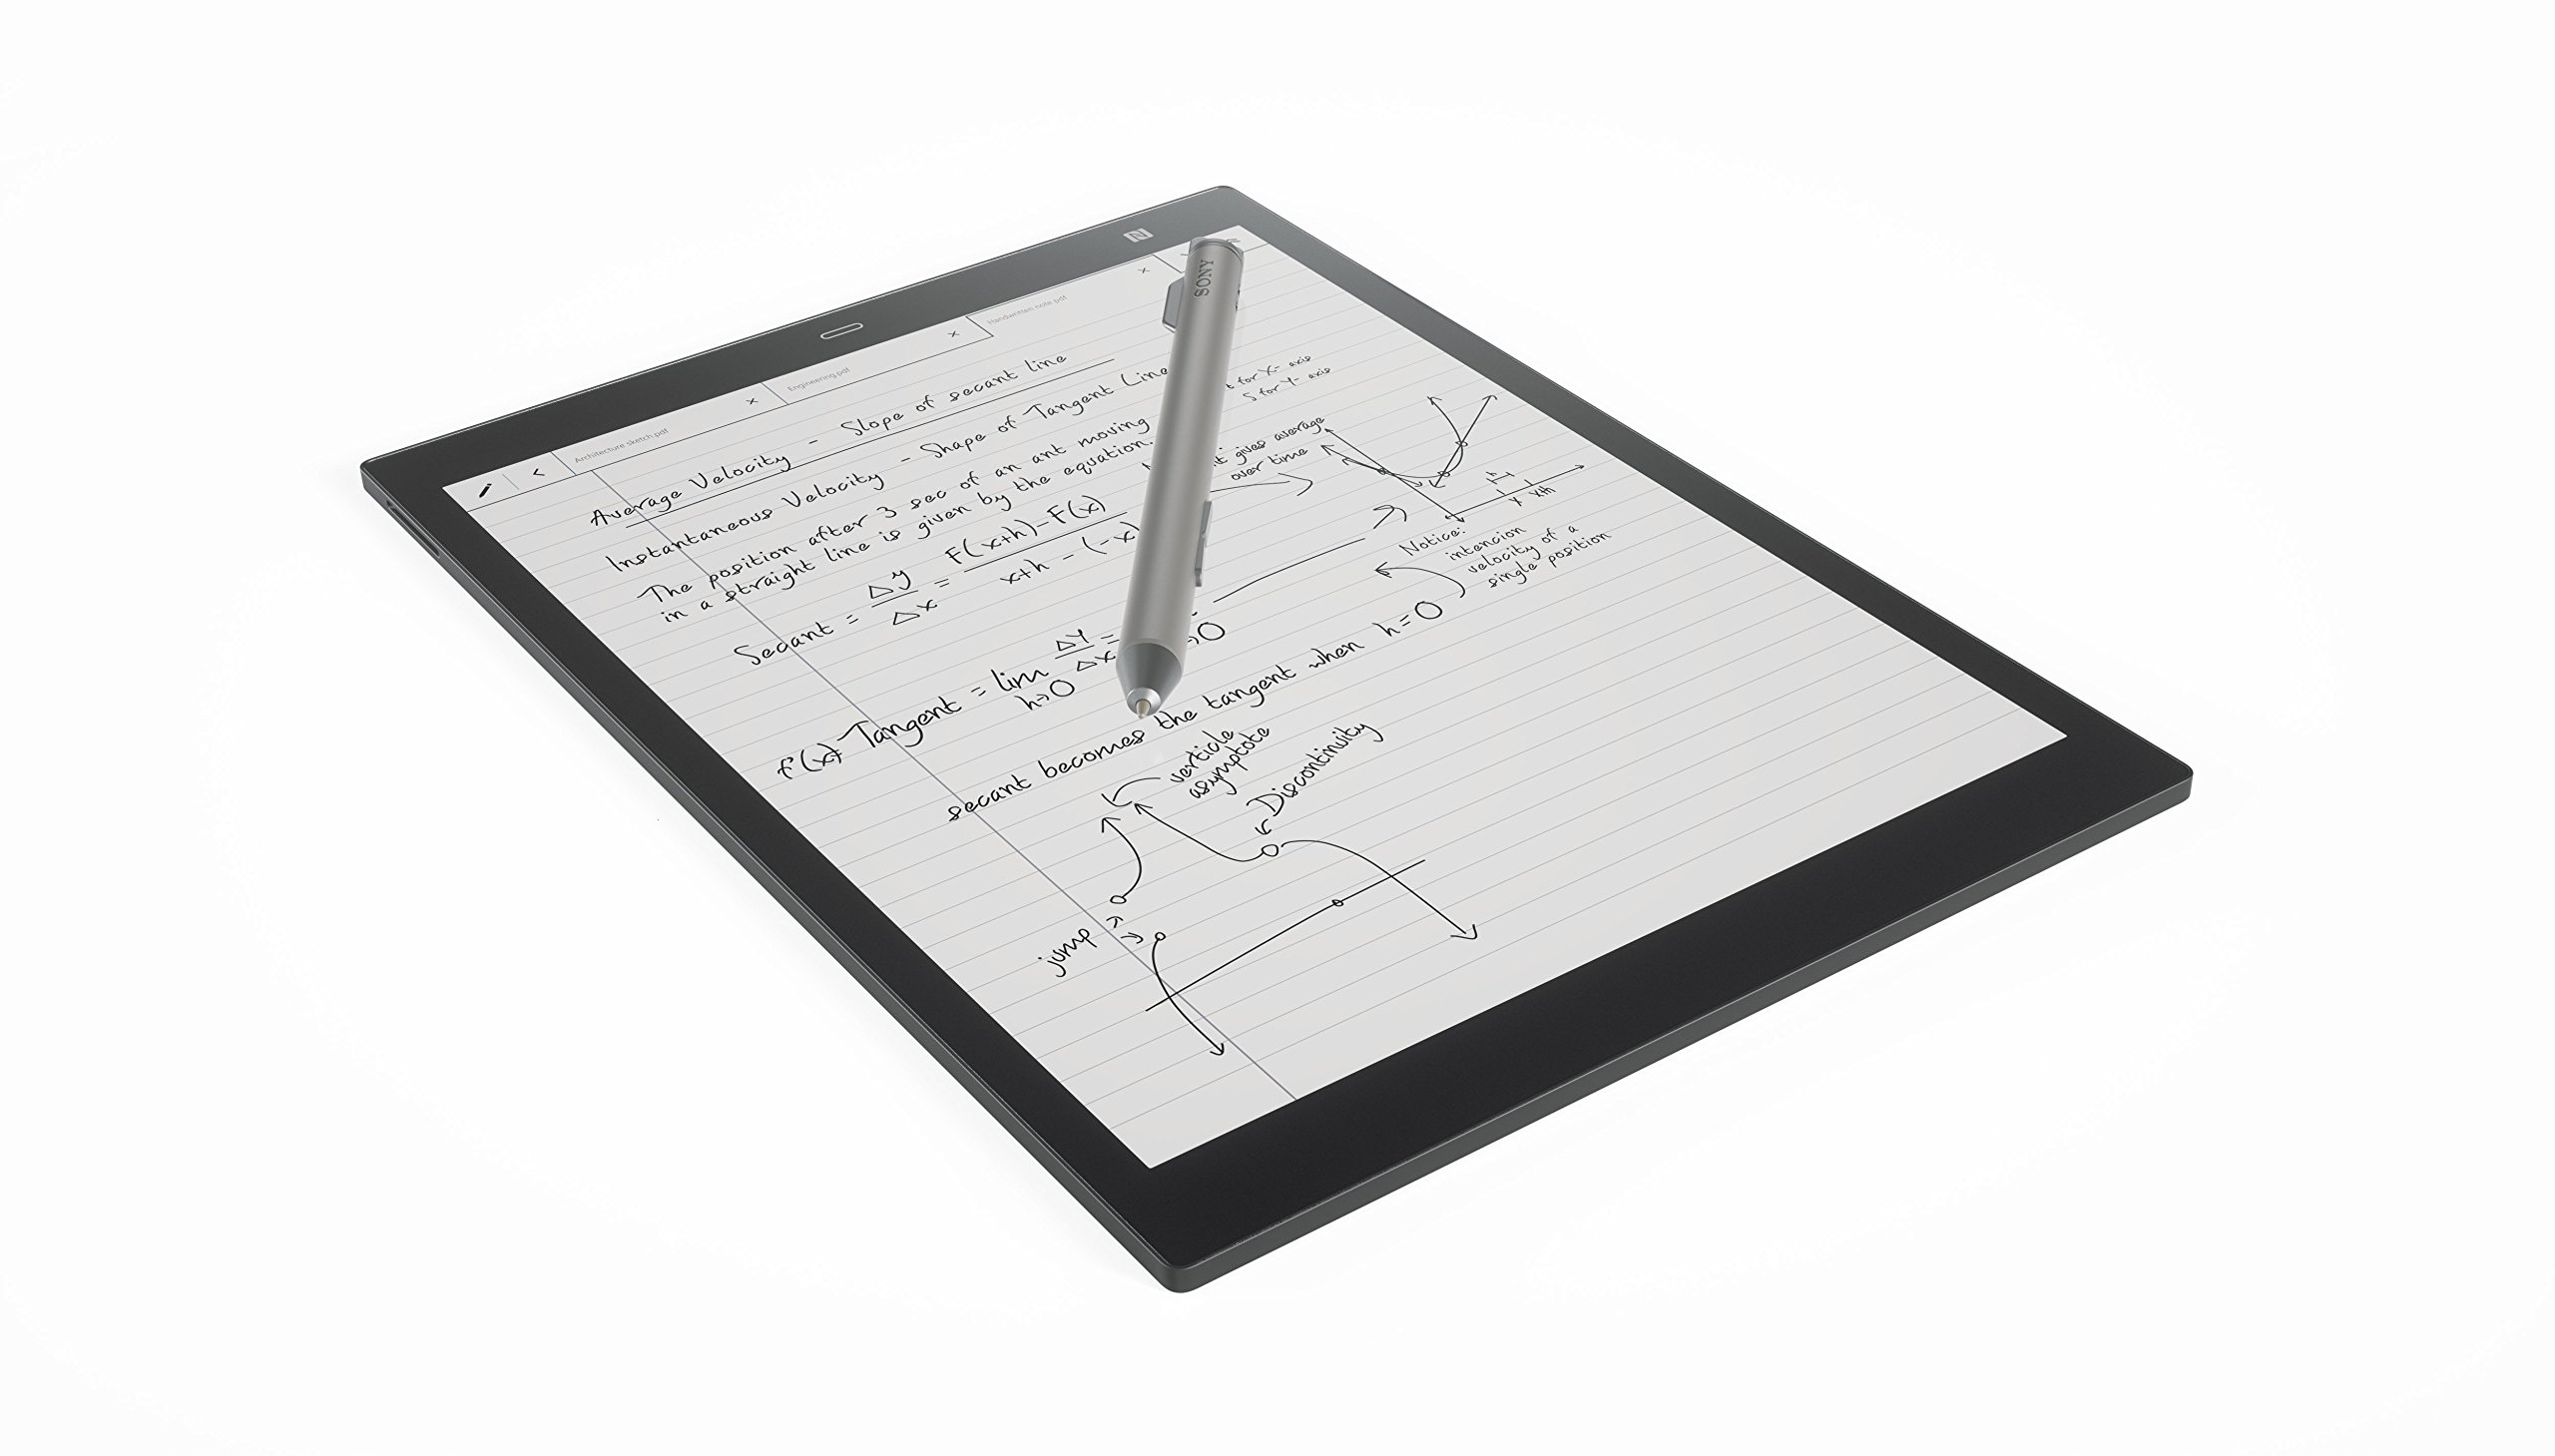 sony-debuts-the-dpt-rp1-e-ink-tablet-for-a-cool-700